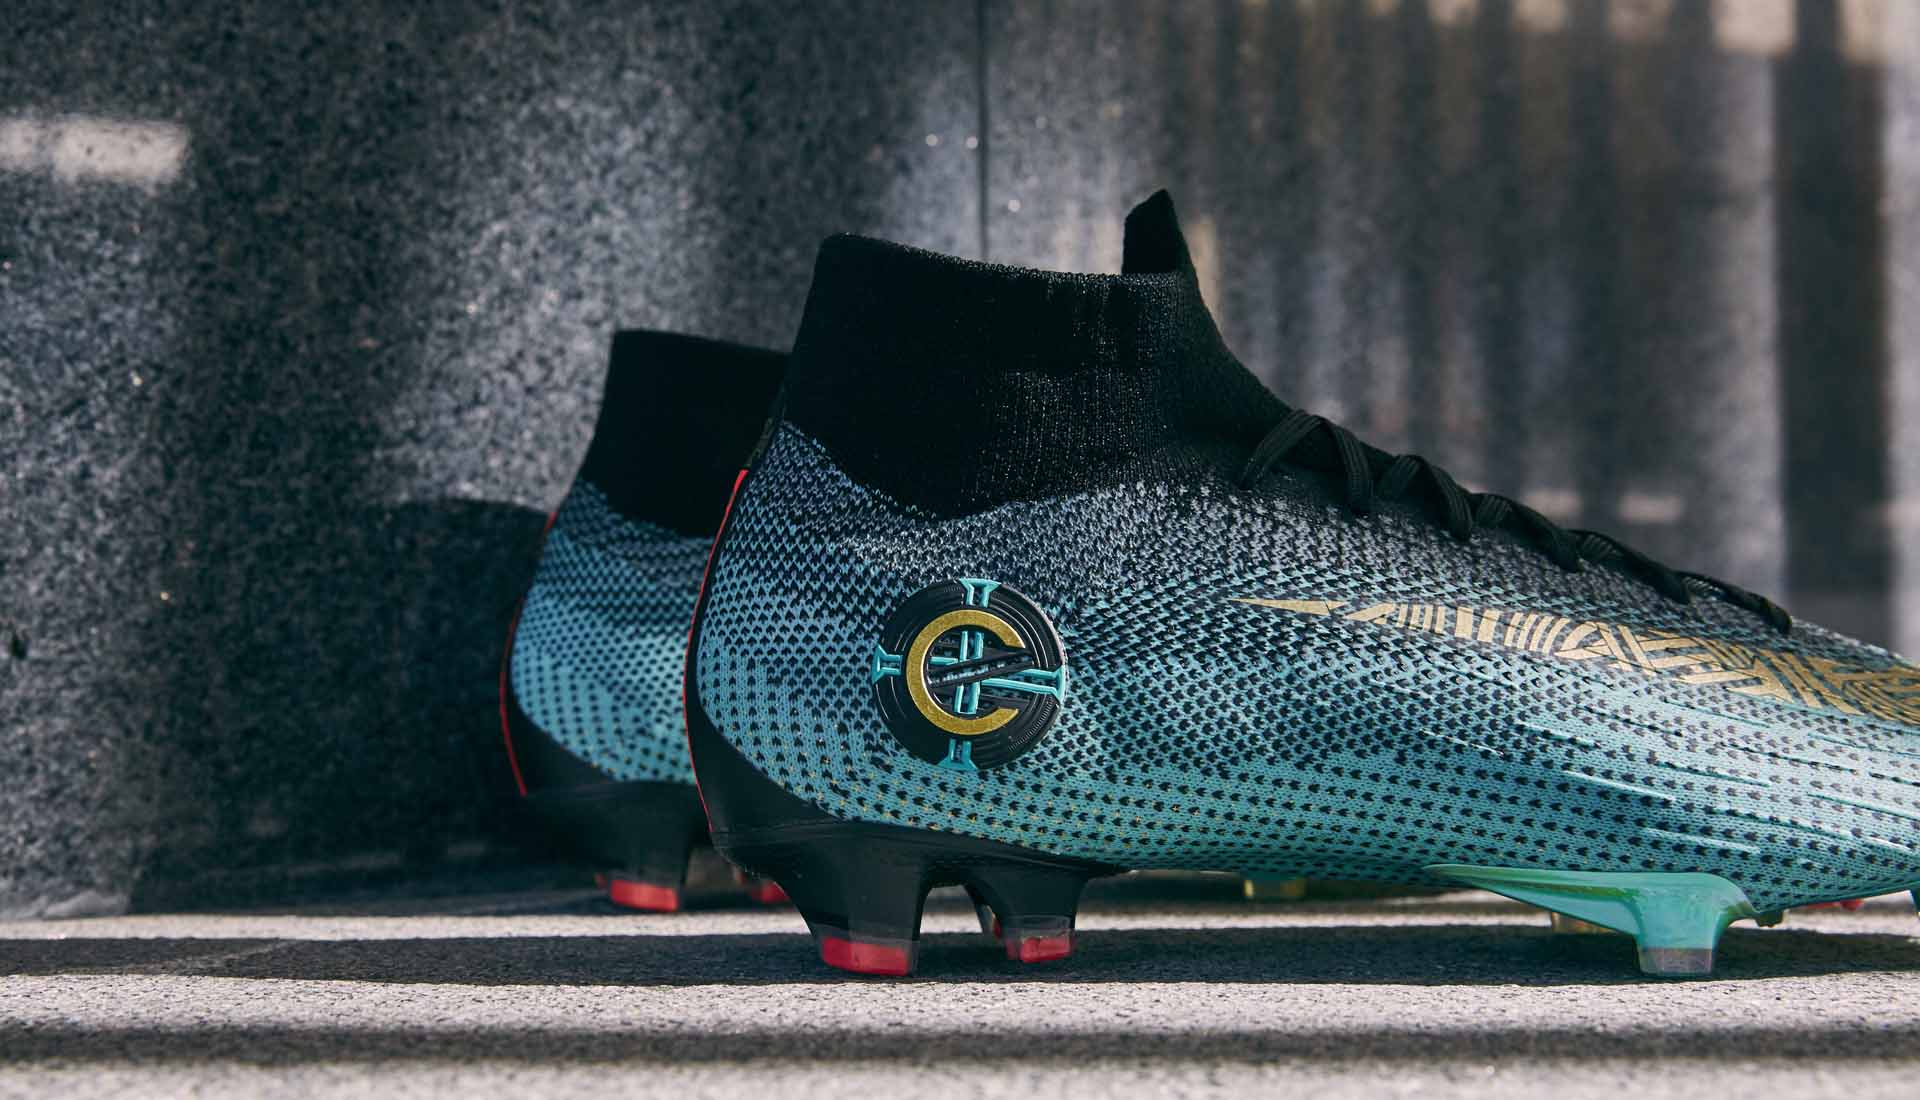 SoccerBible Twitter: "Signature style. @nikefootball launch "Chapter 6" Mercurial for Cristiano to wear this https://t.co/6lrAo0xJnf https://t.co/7Okz8RS3MW" / Twitter